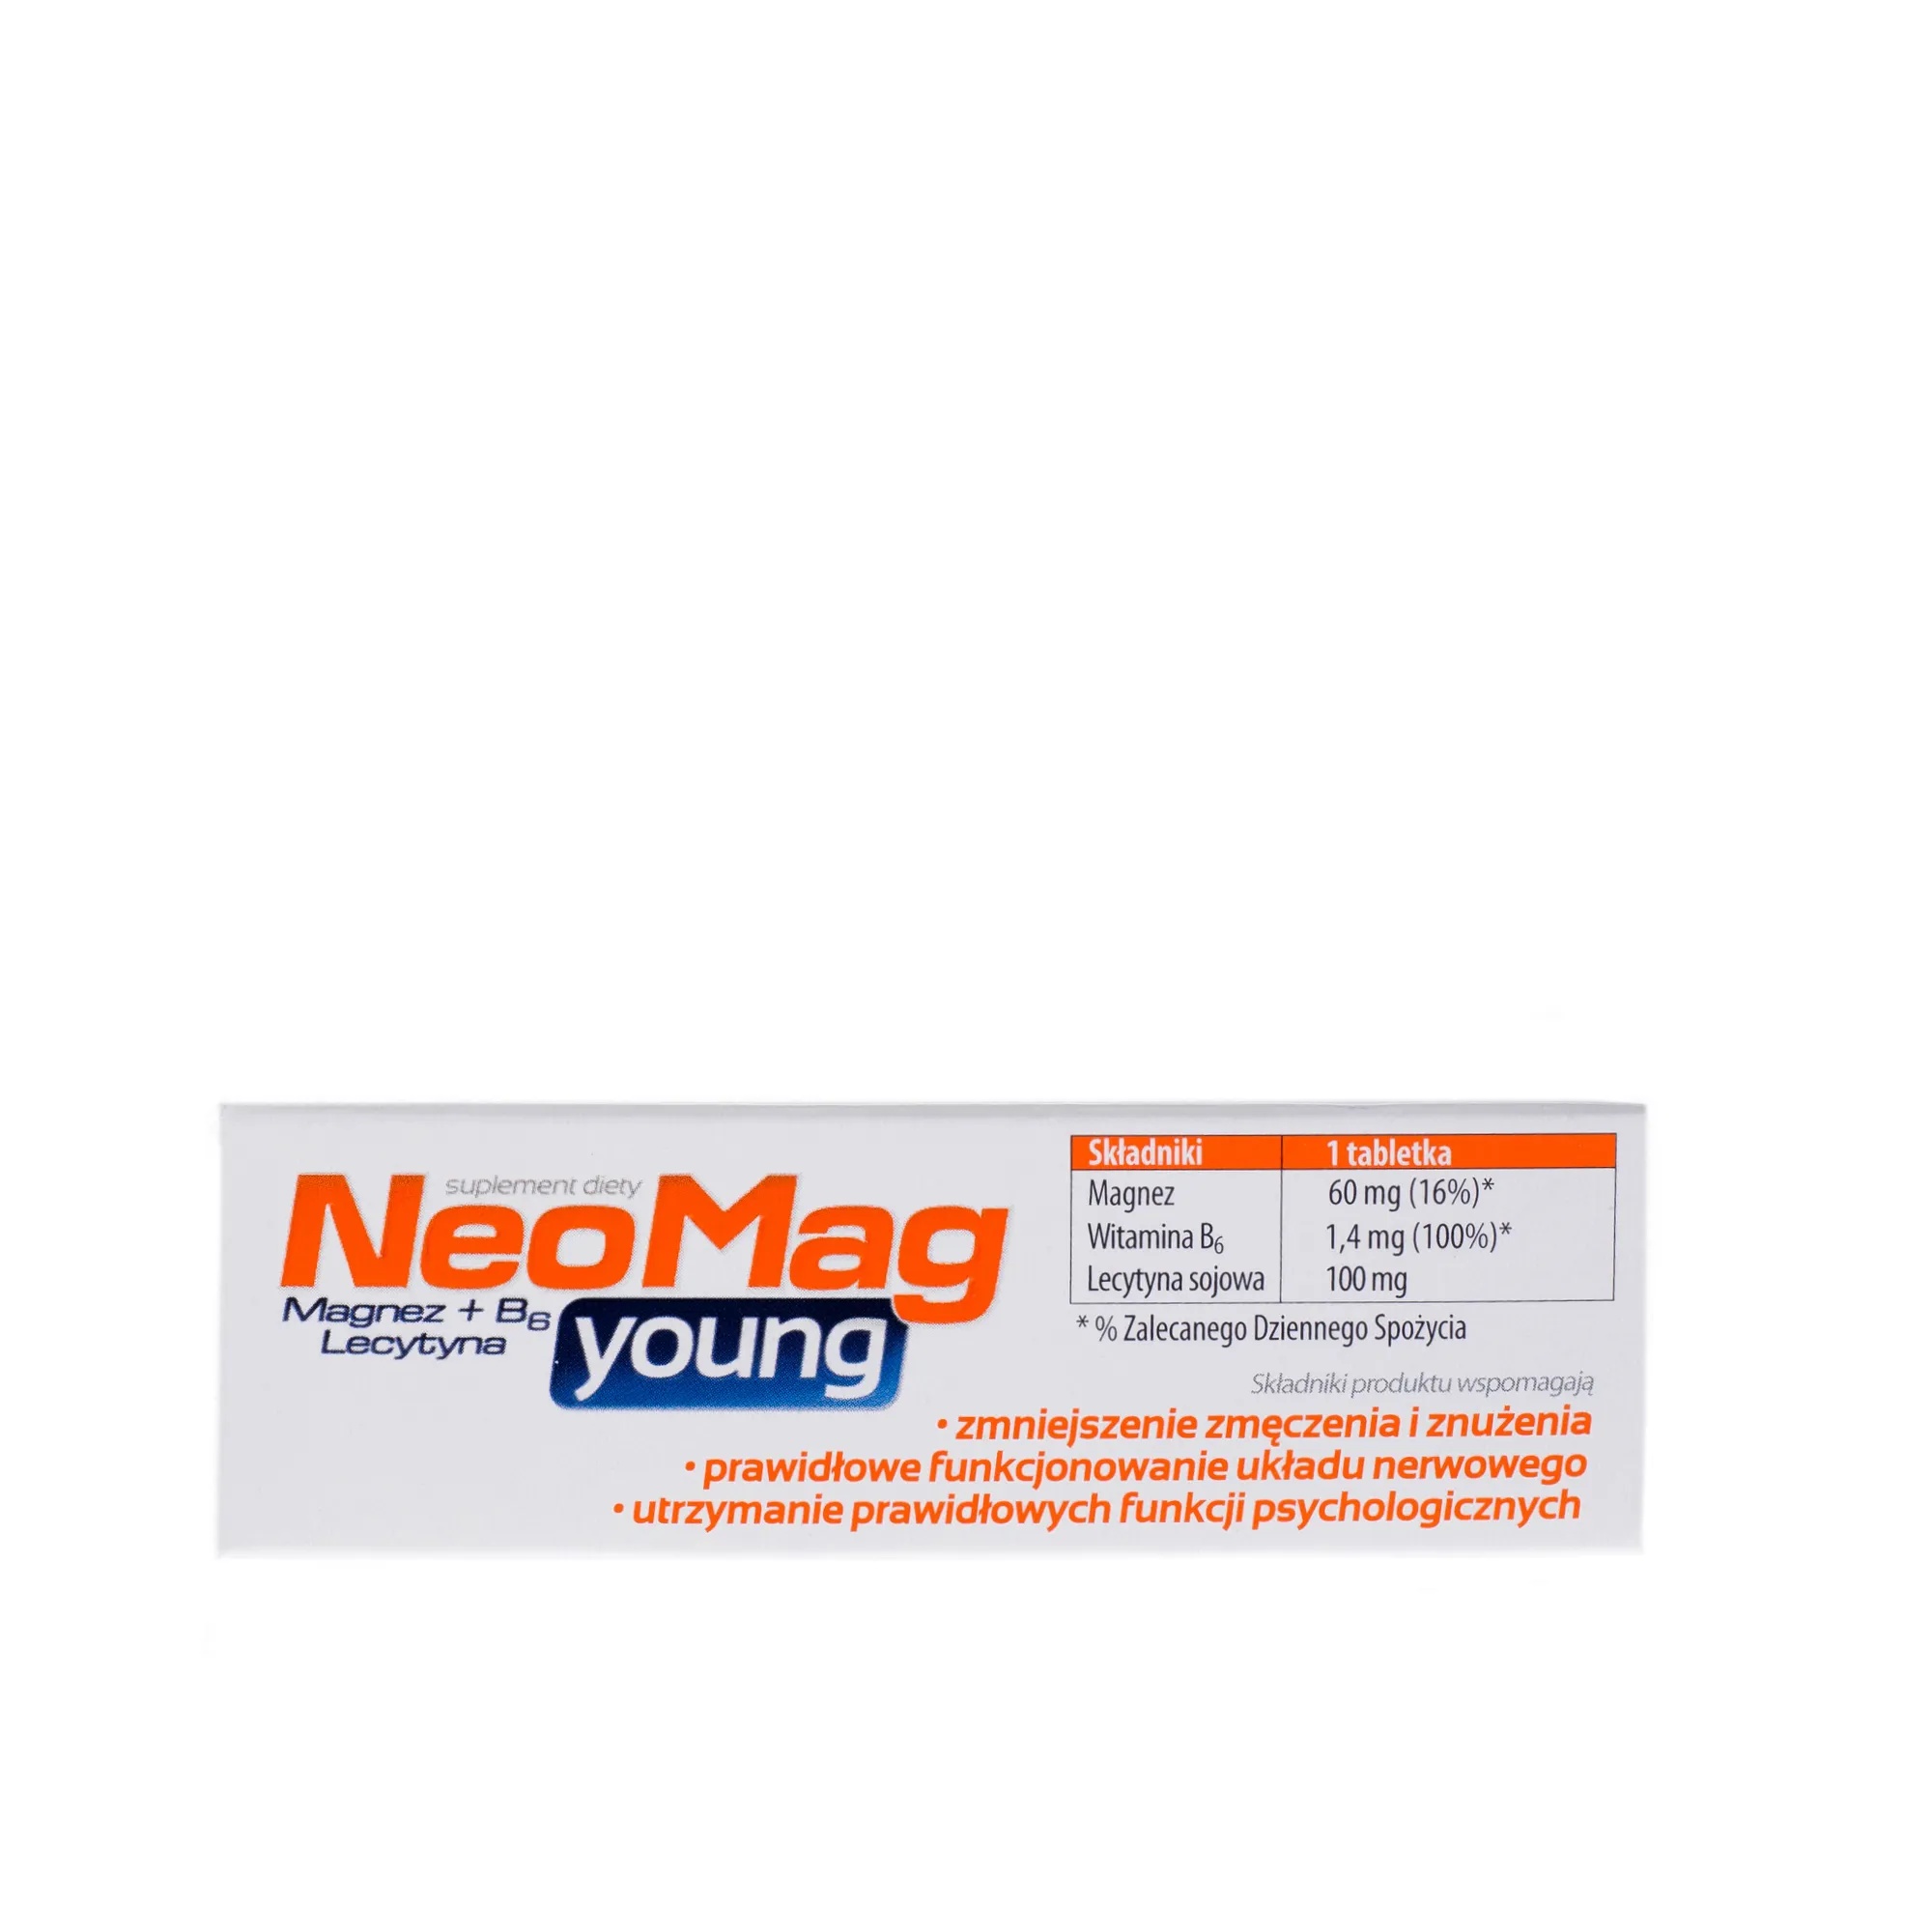 NeoMag young, suplement diety, 30 tabletek 